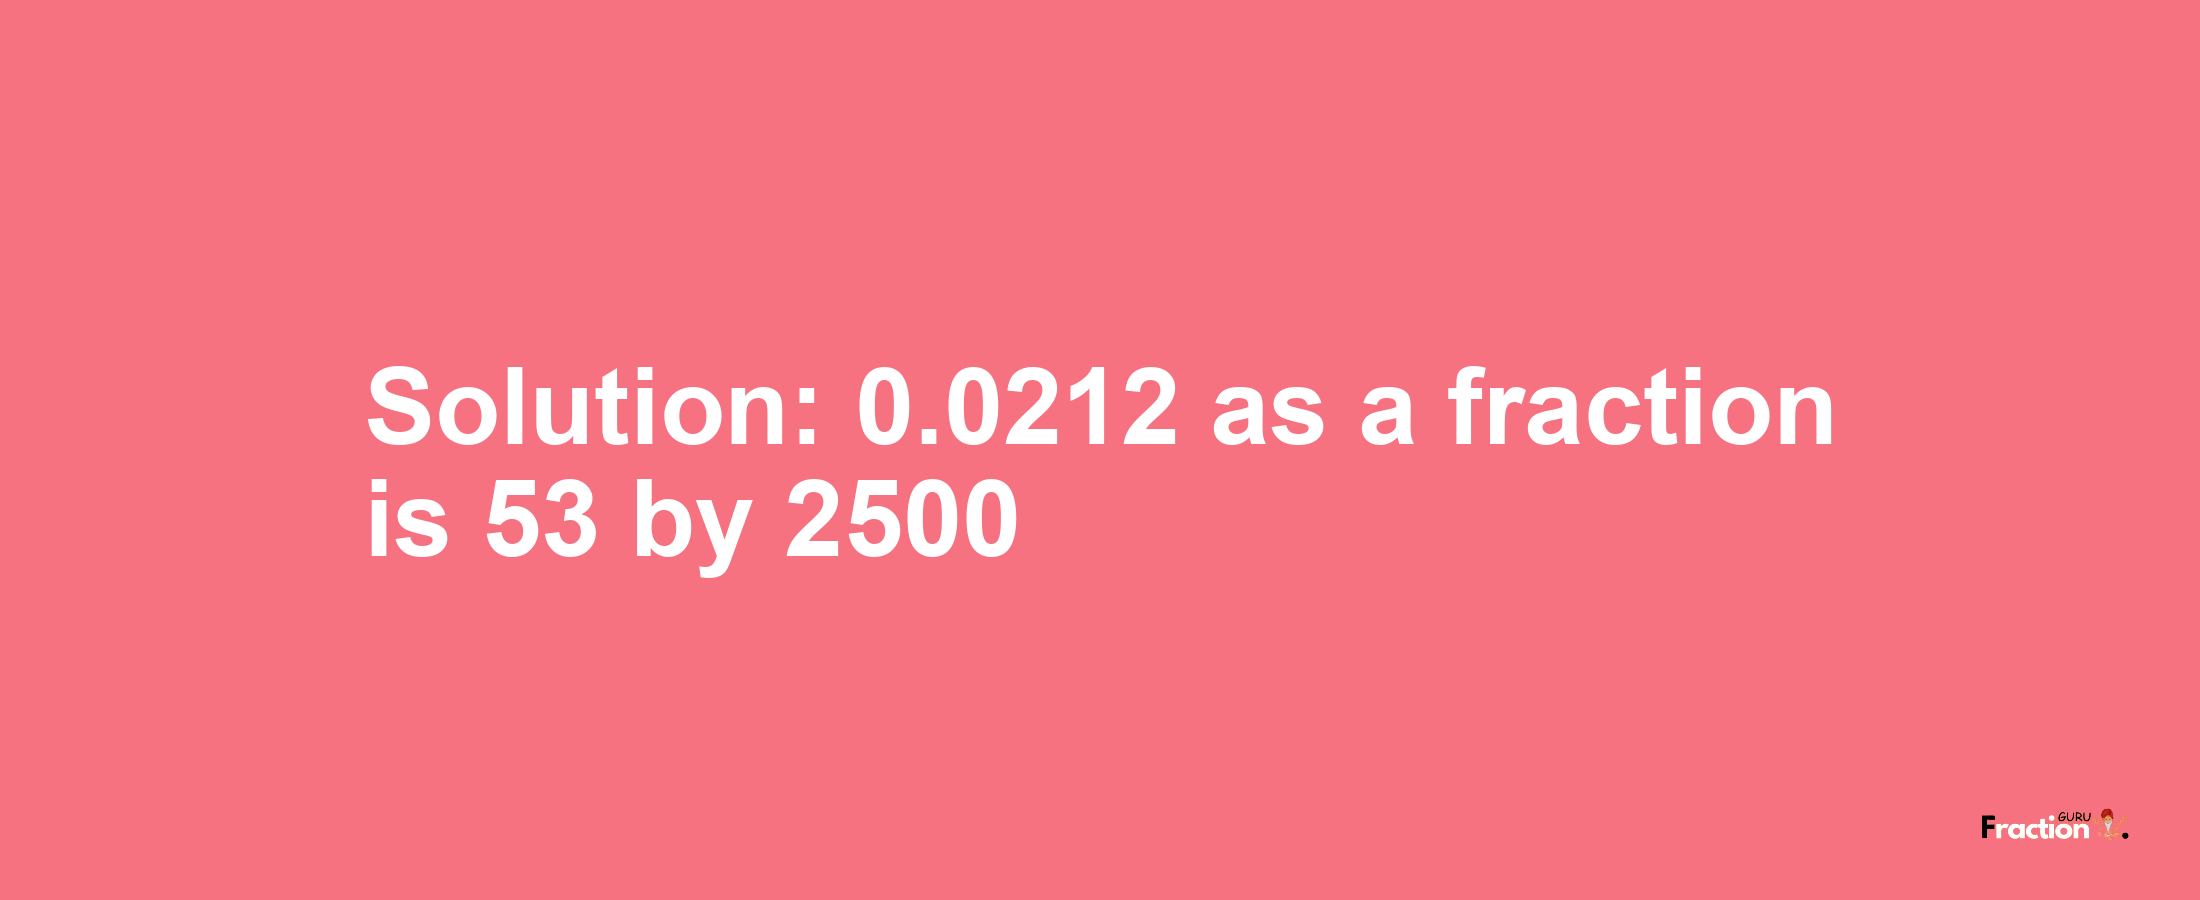 Solution:0.0212 as a fraction is 53/2500